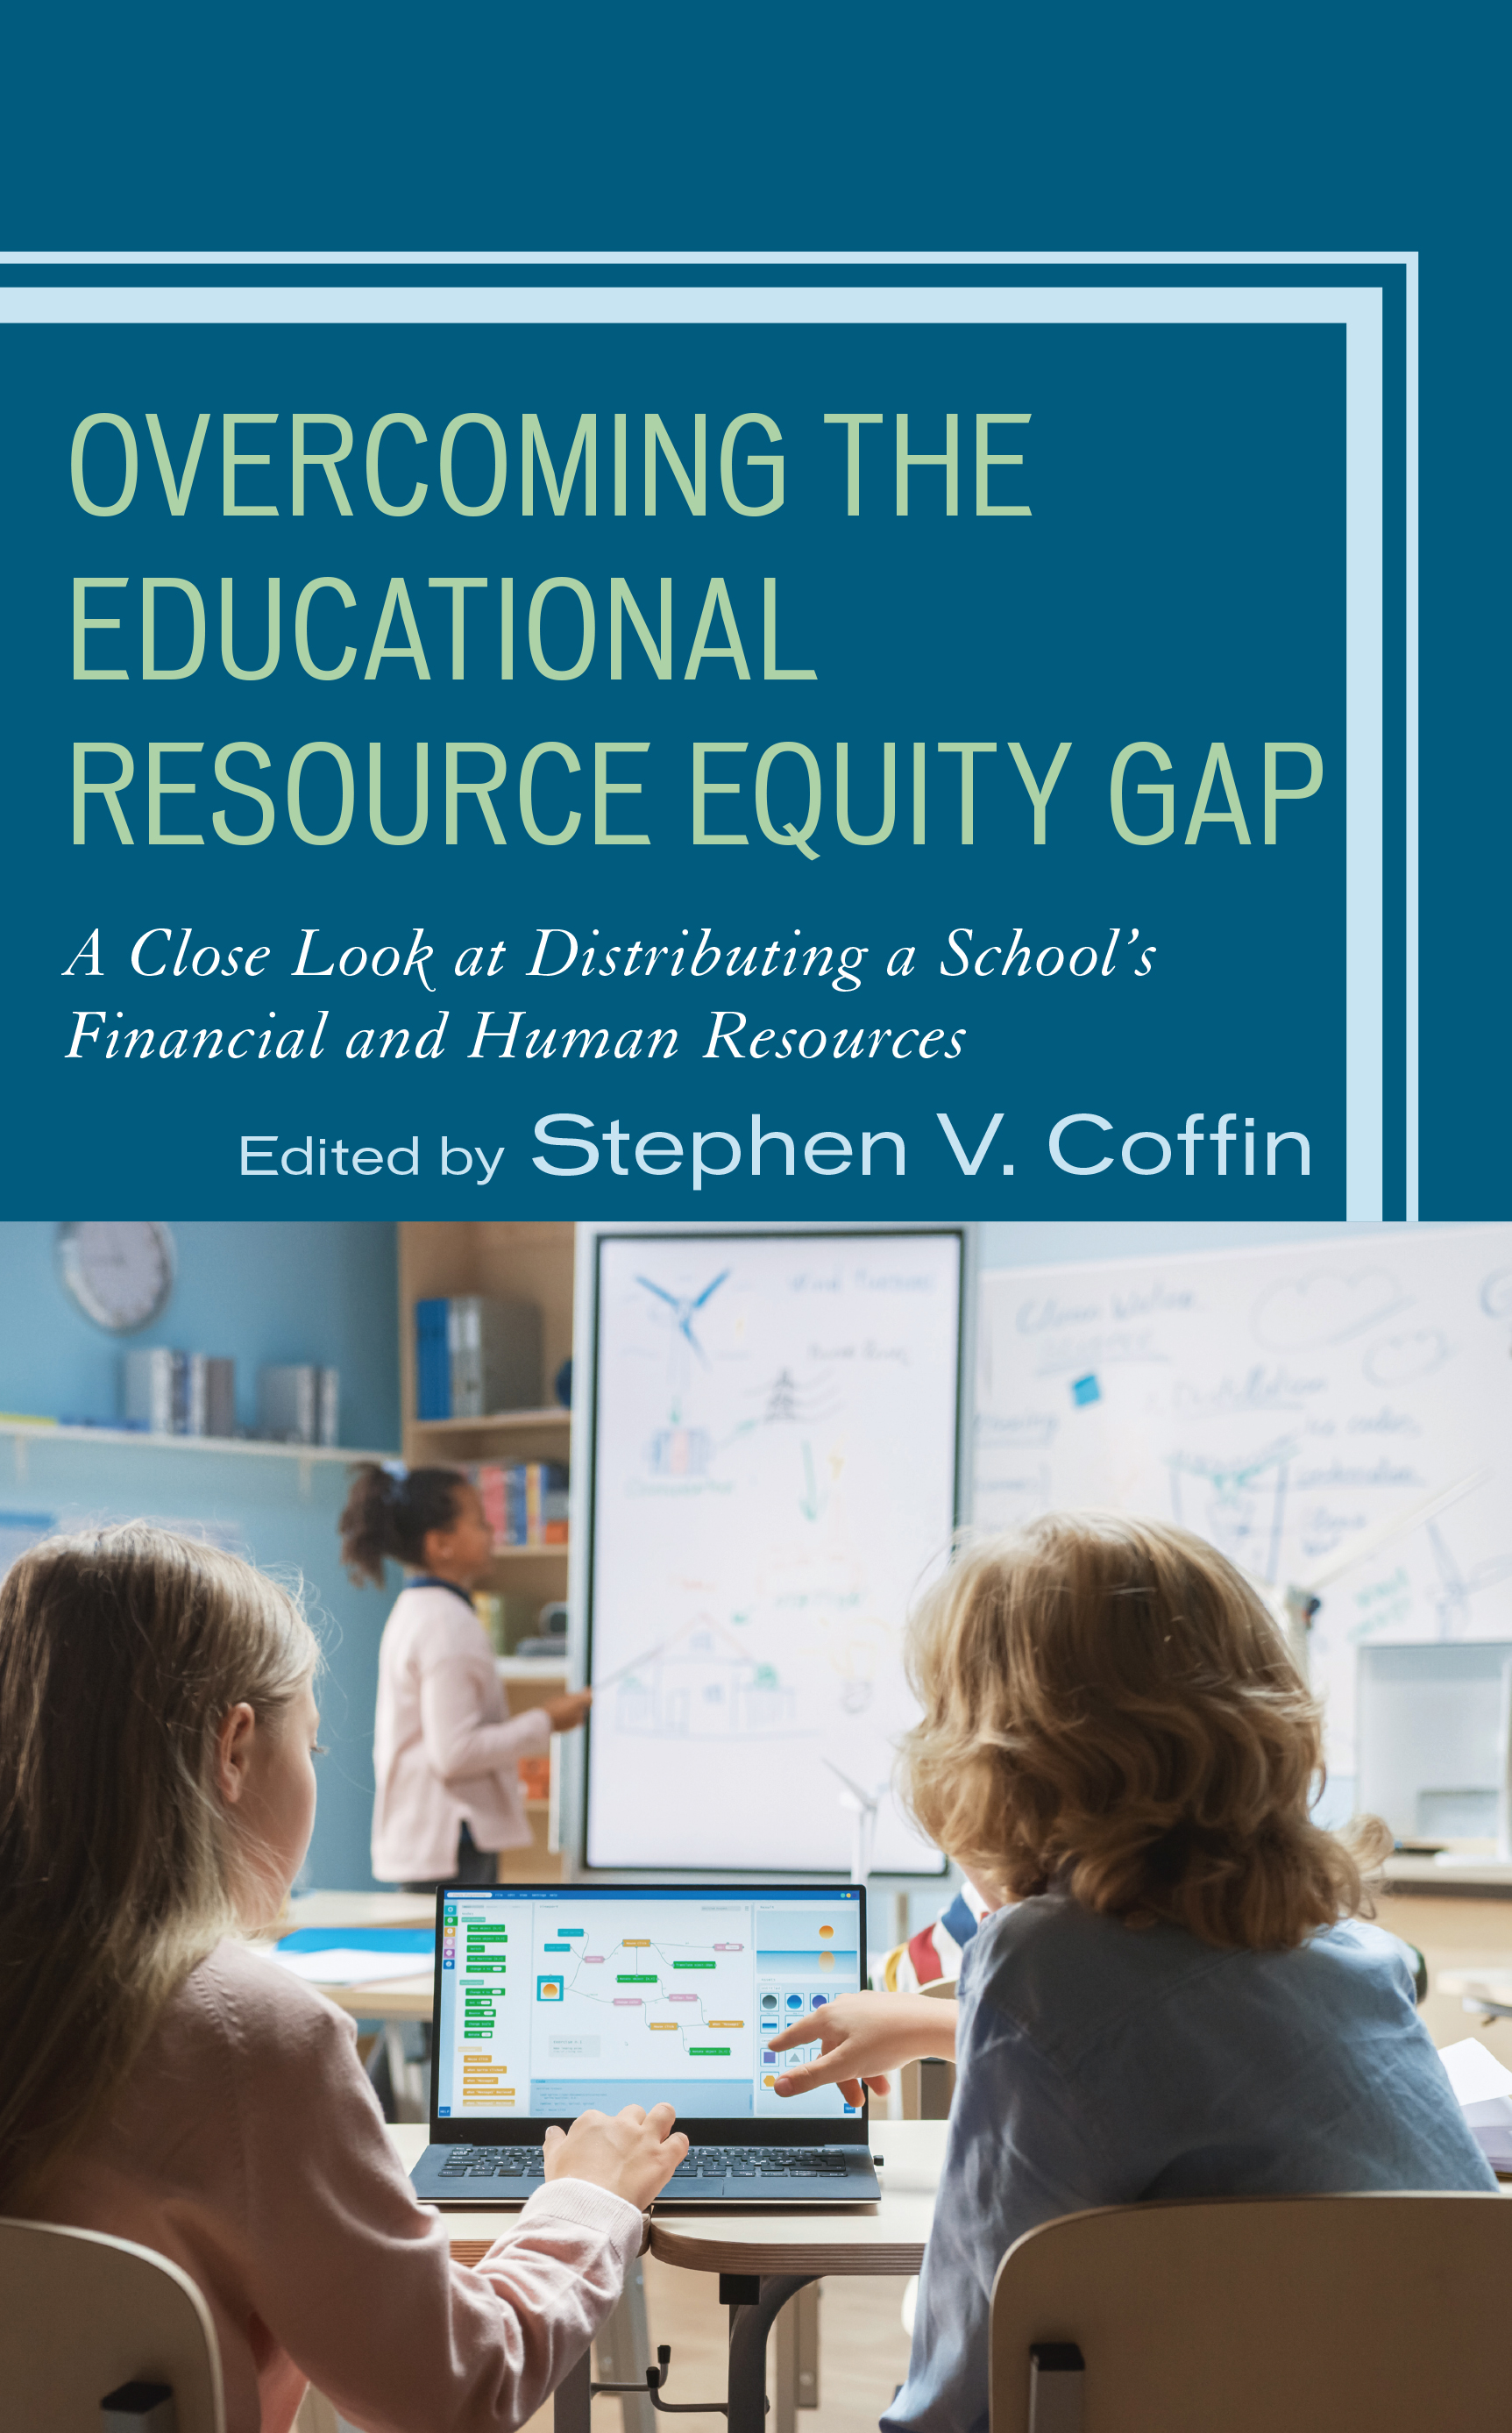 Overcoming the Educational Resource Equity Gap: A Close Look at Distributing a School’s Financial and Human Resources